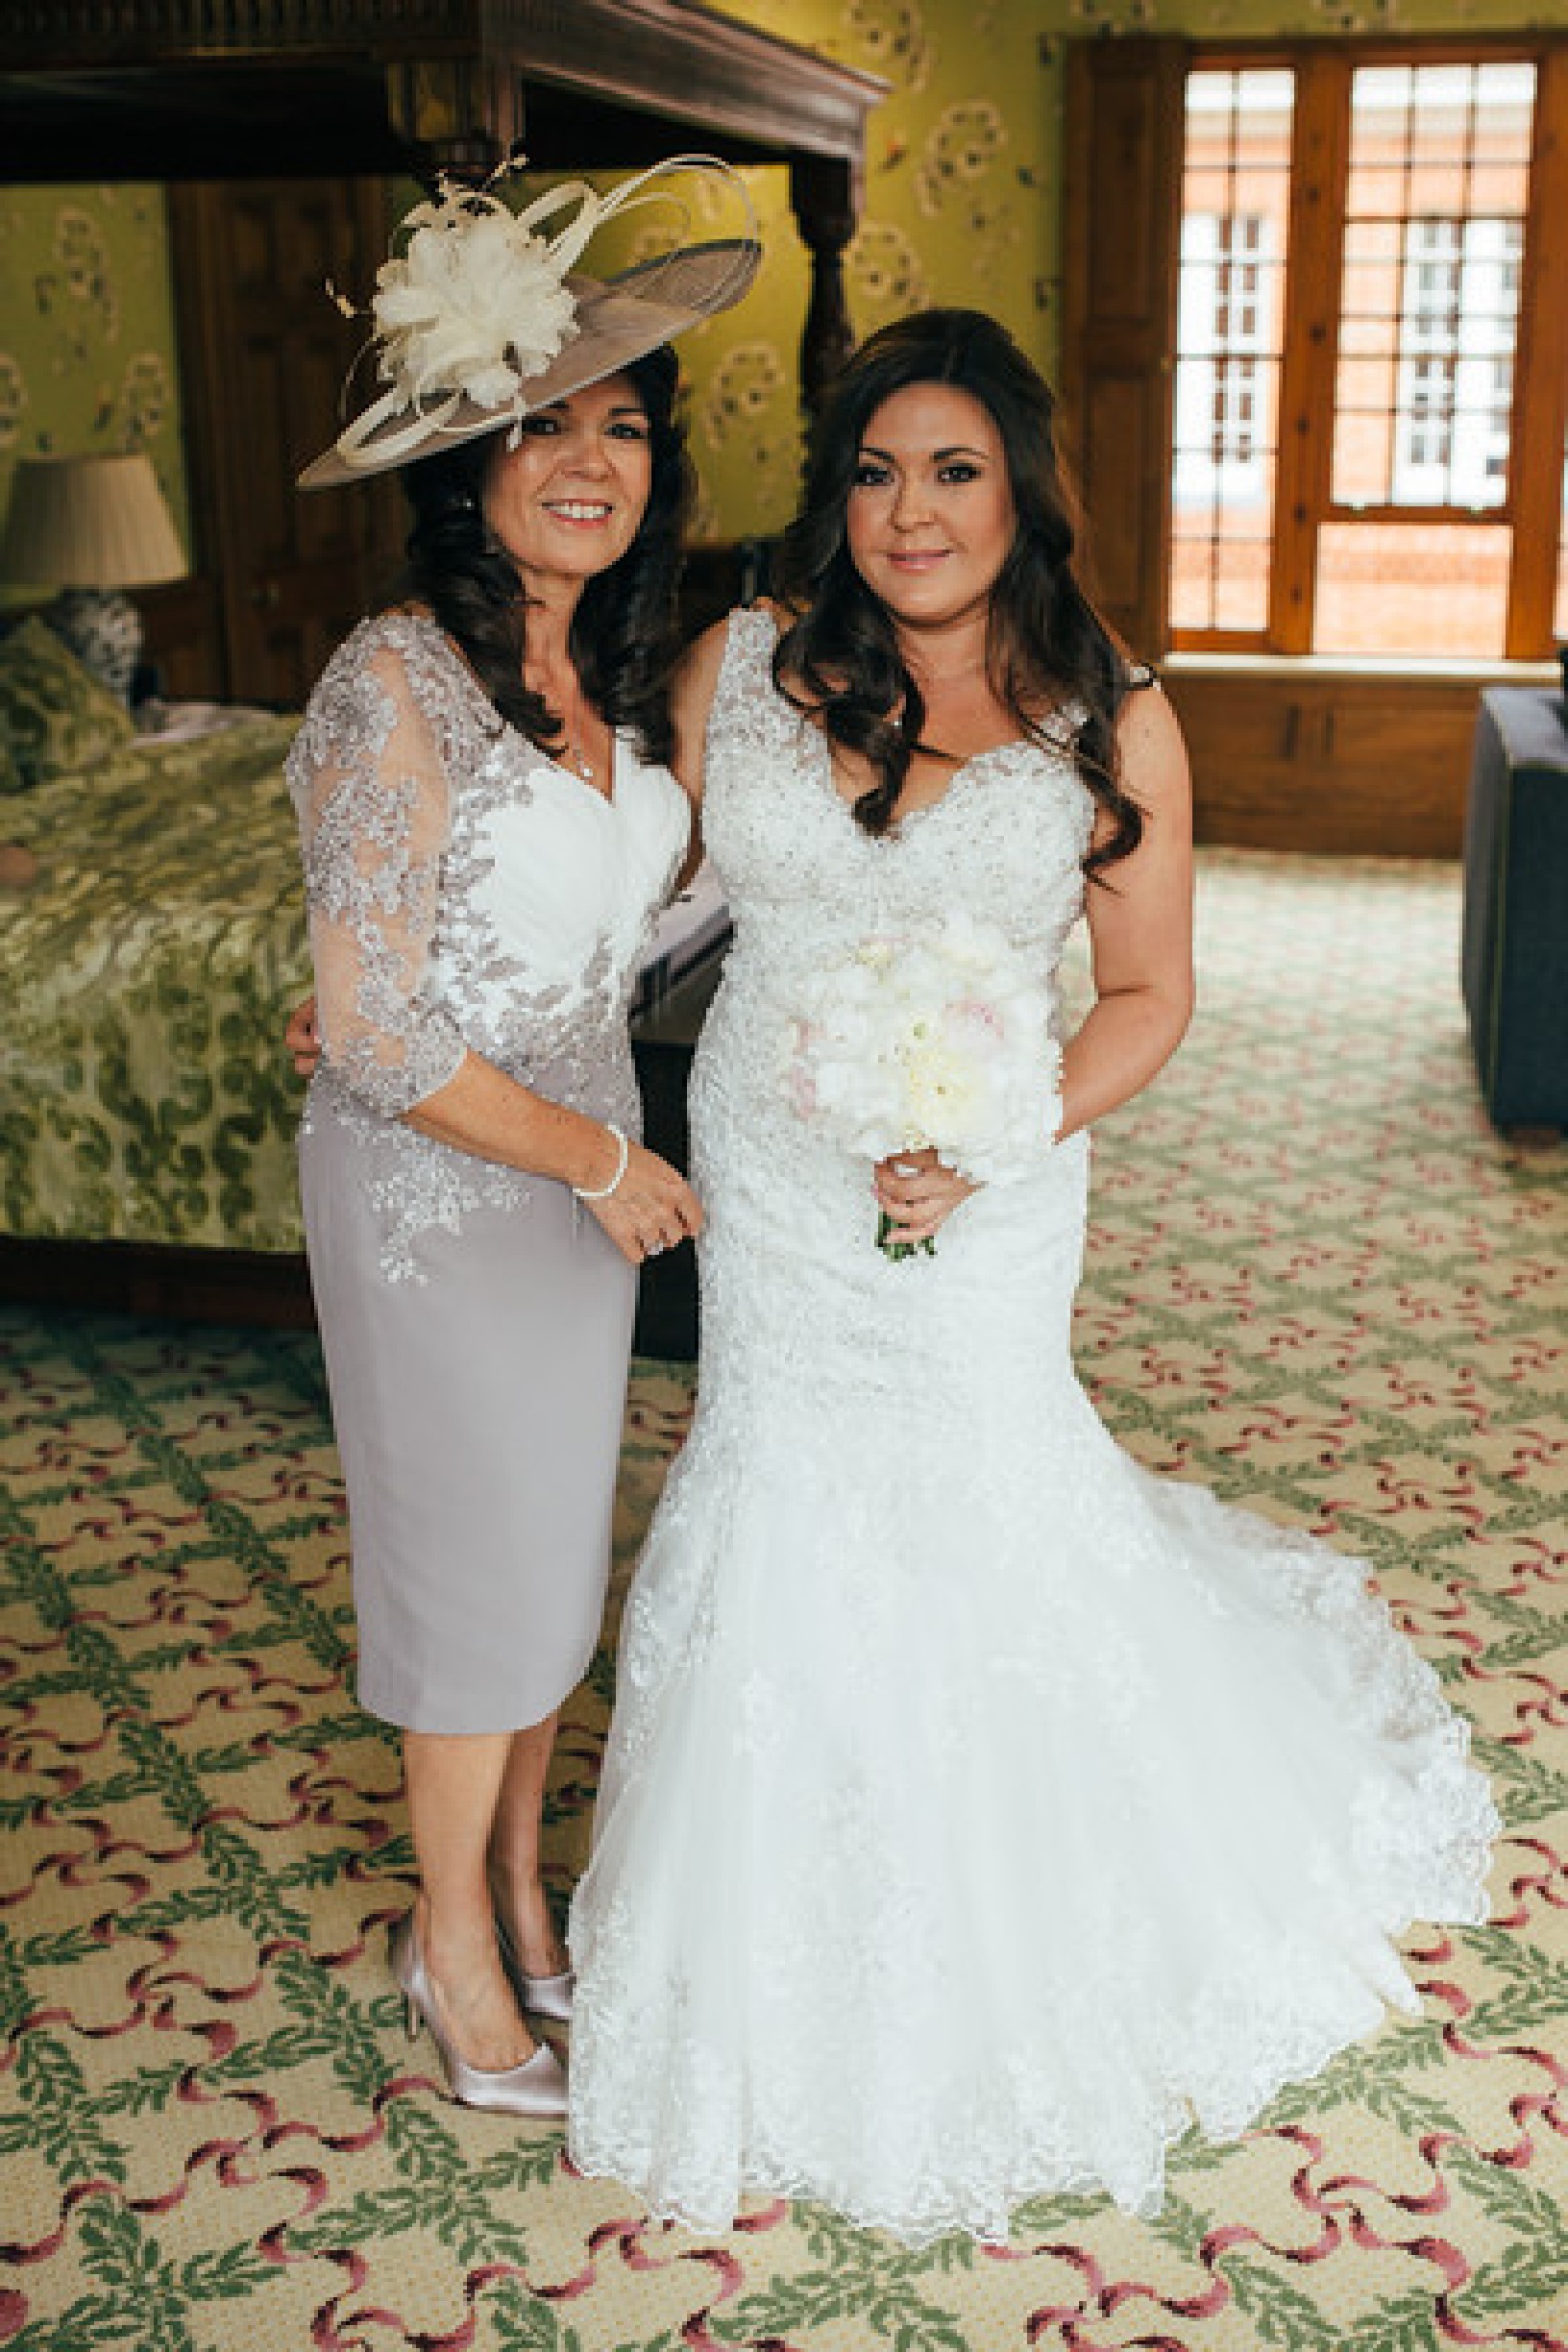 A photo of a bride stood with her mum near a mahogany four-poster bed in a hotel room. The bride wears a lace fishtail wedding dress with a v-neckline